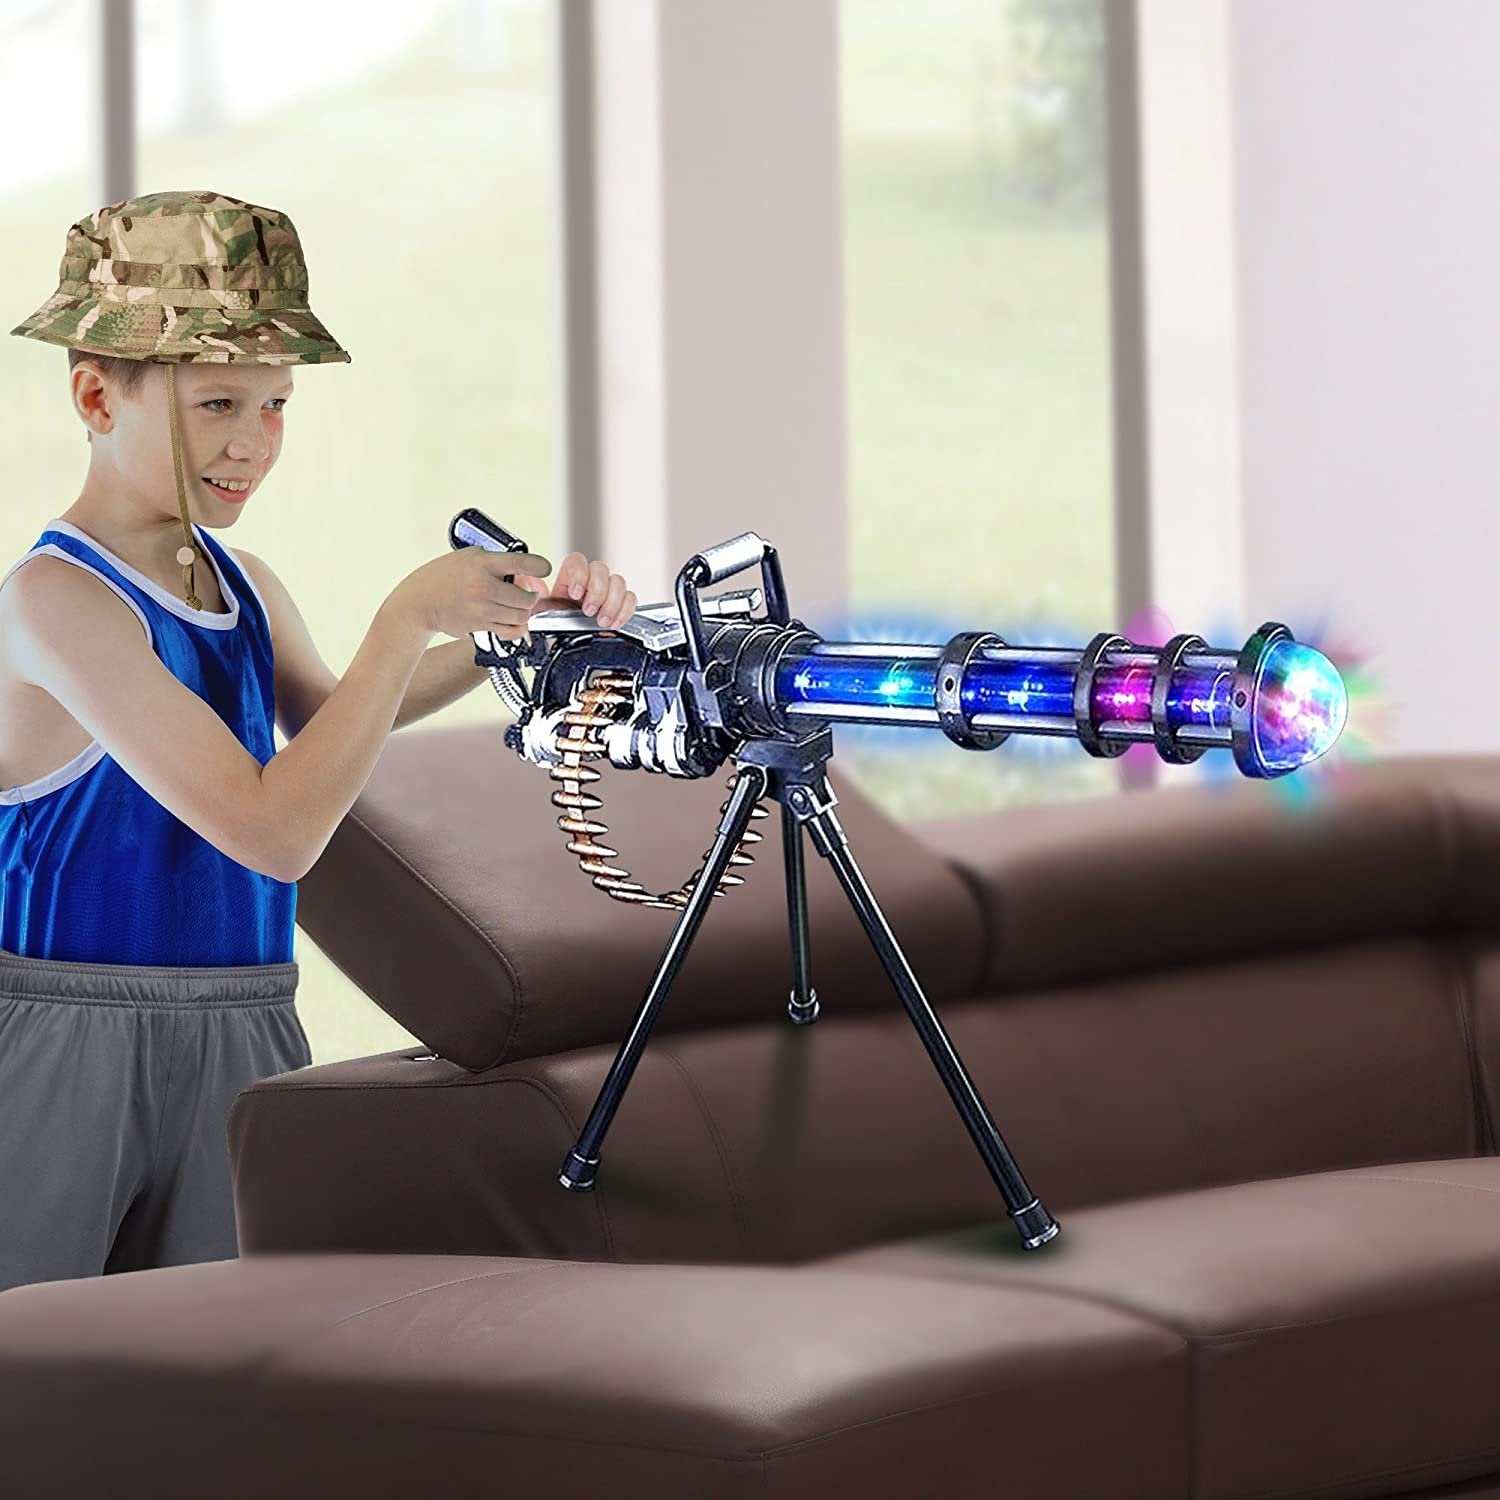 ArtCreativity Light Up Rotary Machine Toy Gun with Tripod Stand Rotating Barrel, LED and Sound Effects - 23 Inch Pretend Play Military Rifle - Batteries Included - Great Gift for Boys and Girls